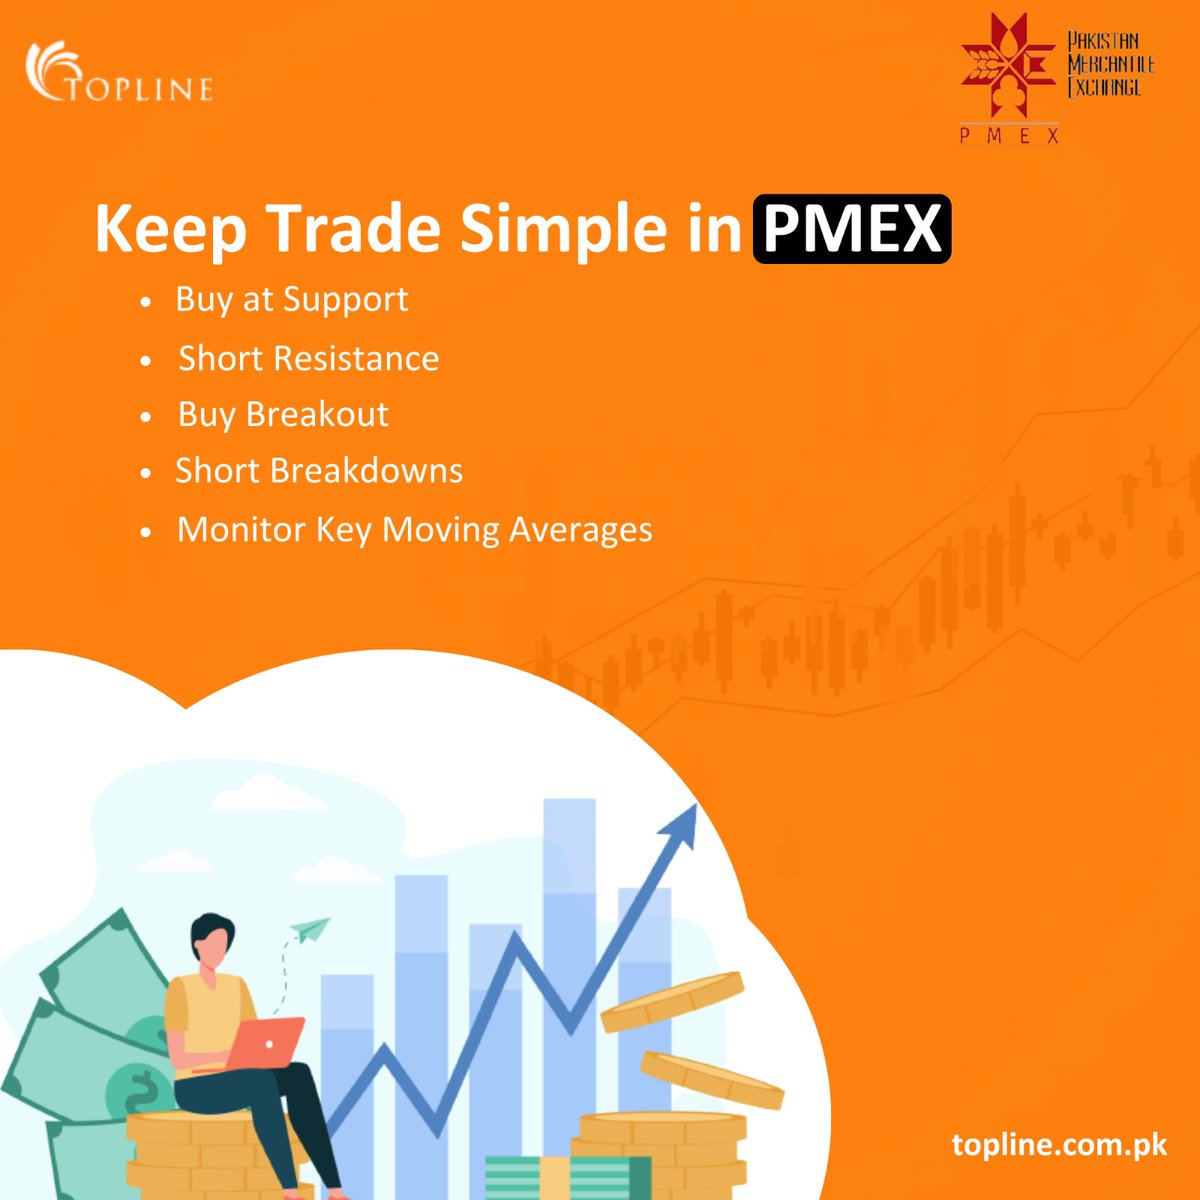 Discover the power of simplicity in trading with Topline Securities. Trade in Oil, Gold and Indices with ease and confidence,join us now.
For further assistance you can WhatsApp us at 03102447160 or email at info@topline.com.pk
#KeepTradingSimple #EasyTrading #Gold #PMEX #Topline